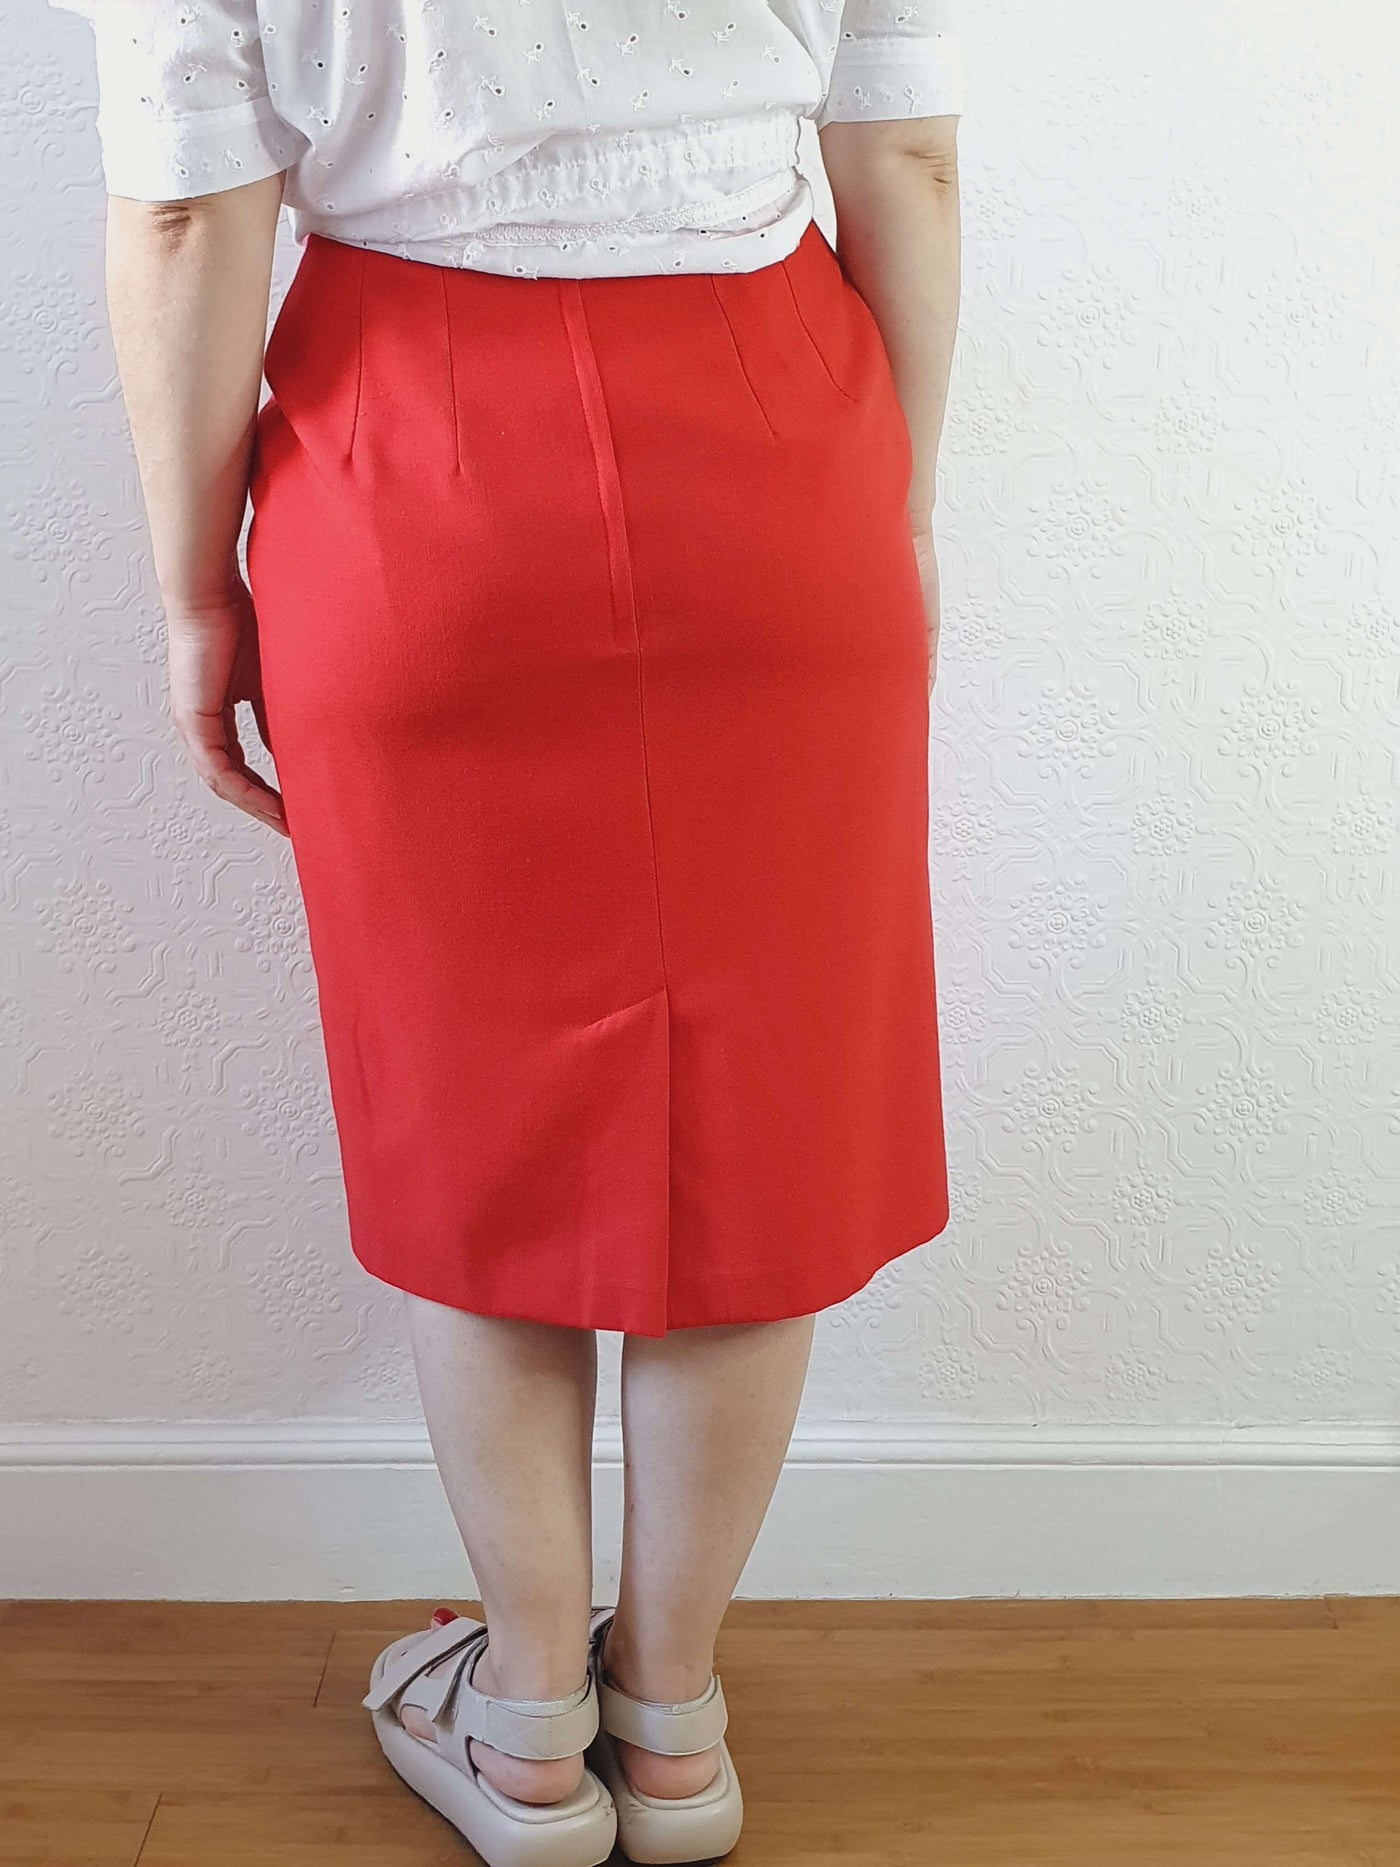 Vintage St Michael Red Pencil Skirt - S